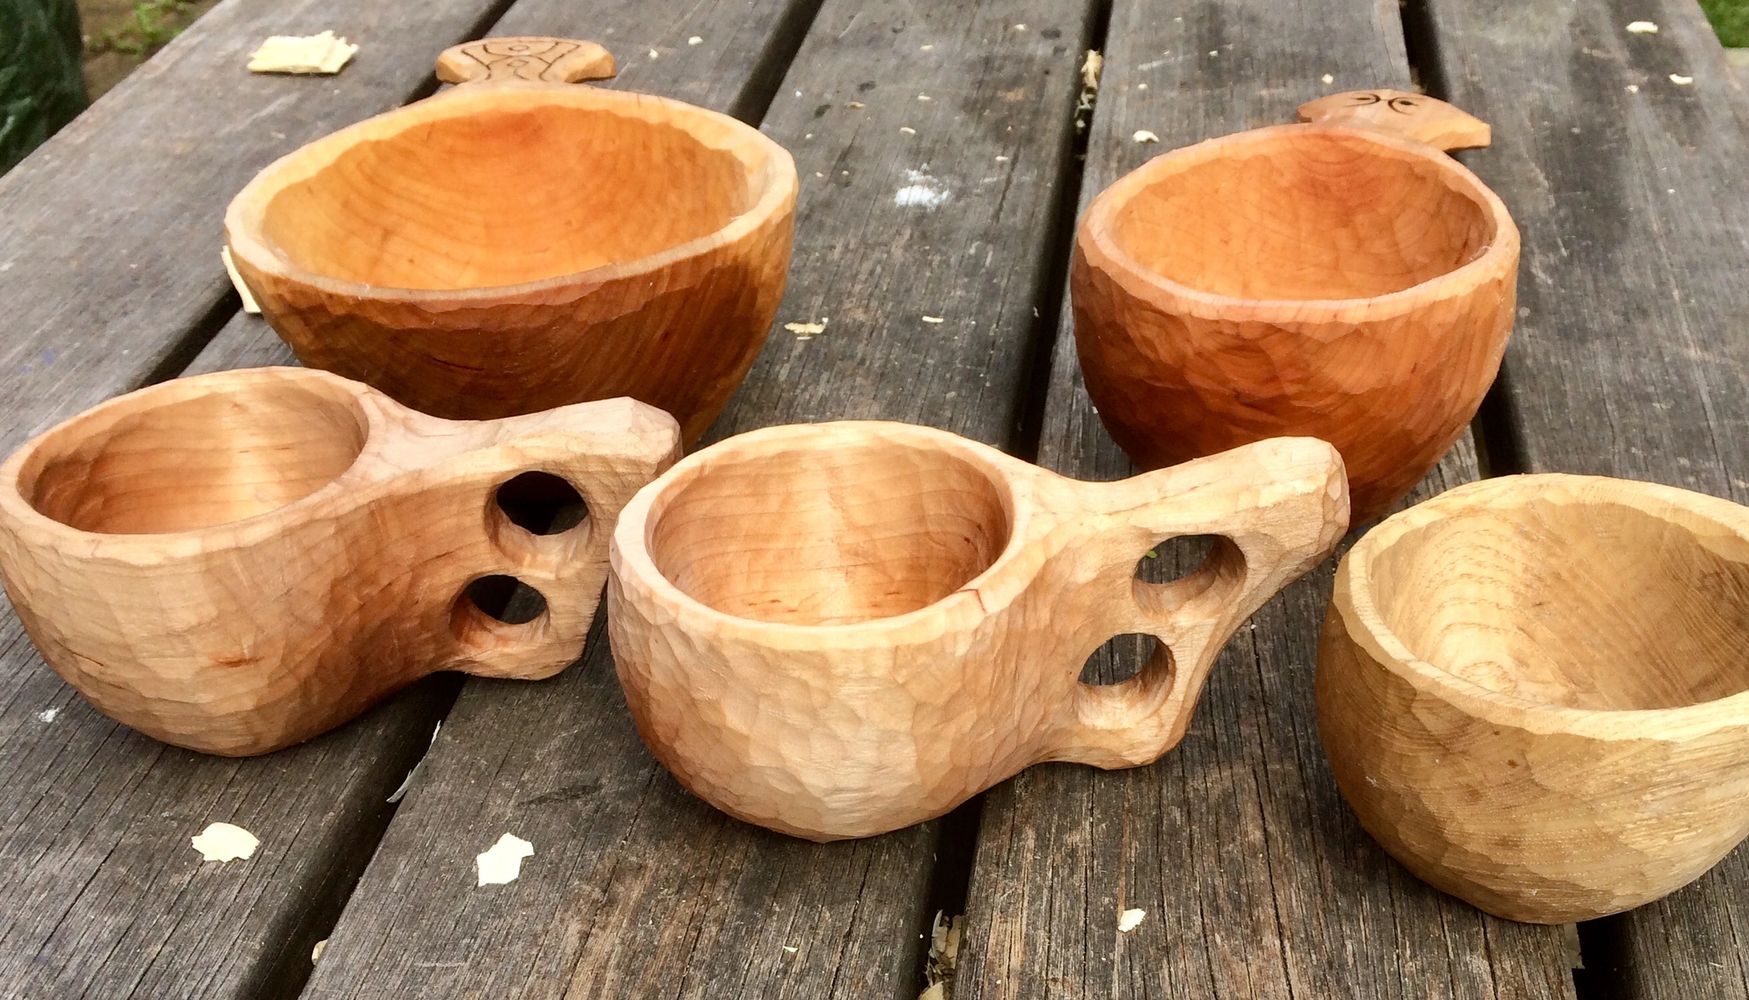 The full range of Kuksa cups and bowls